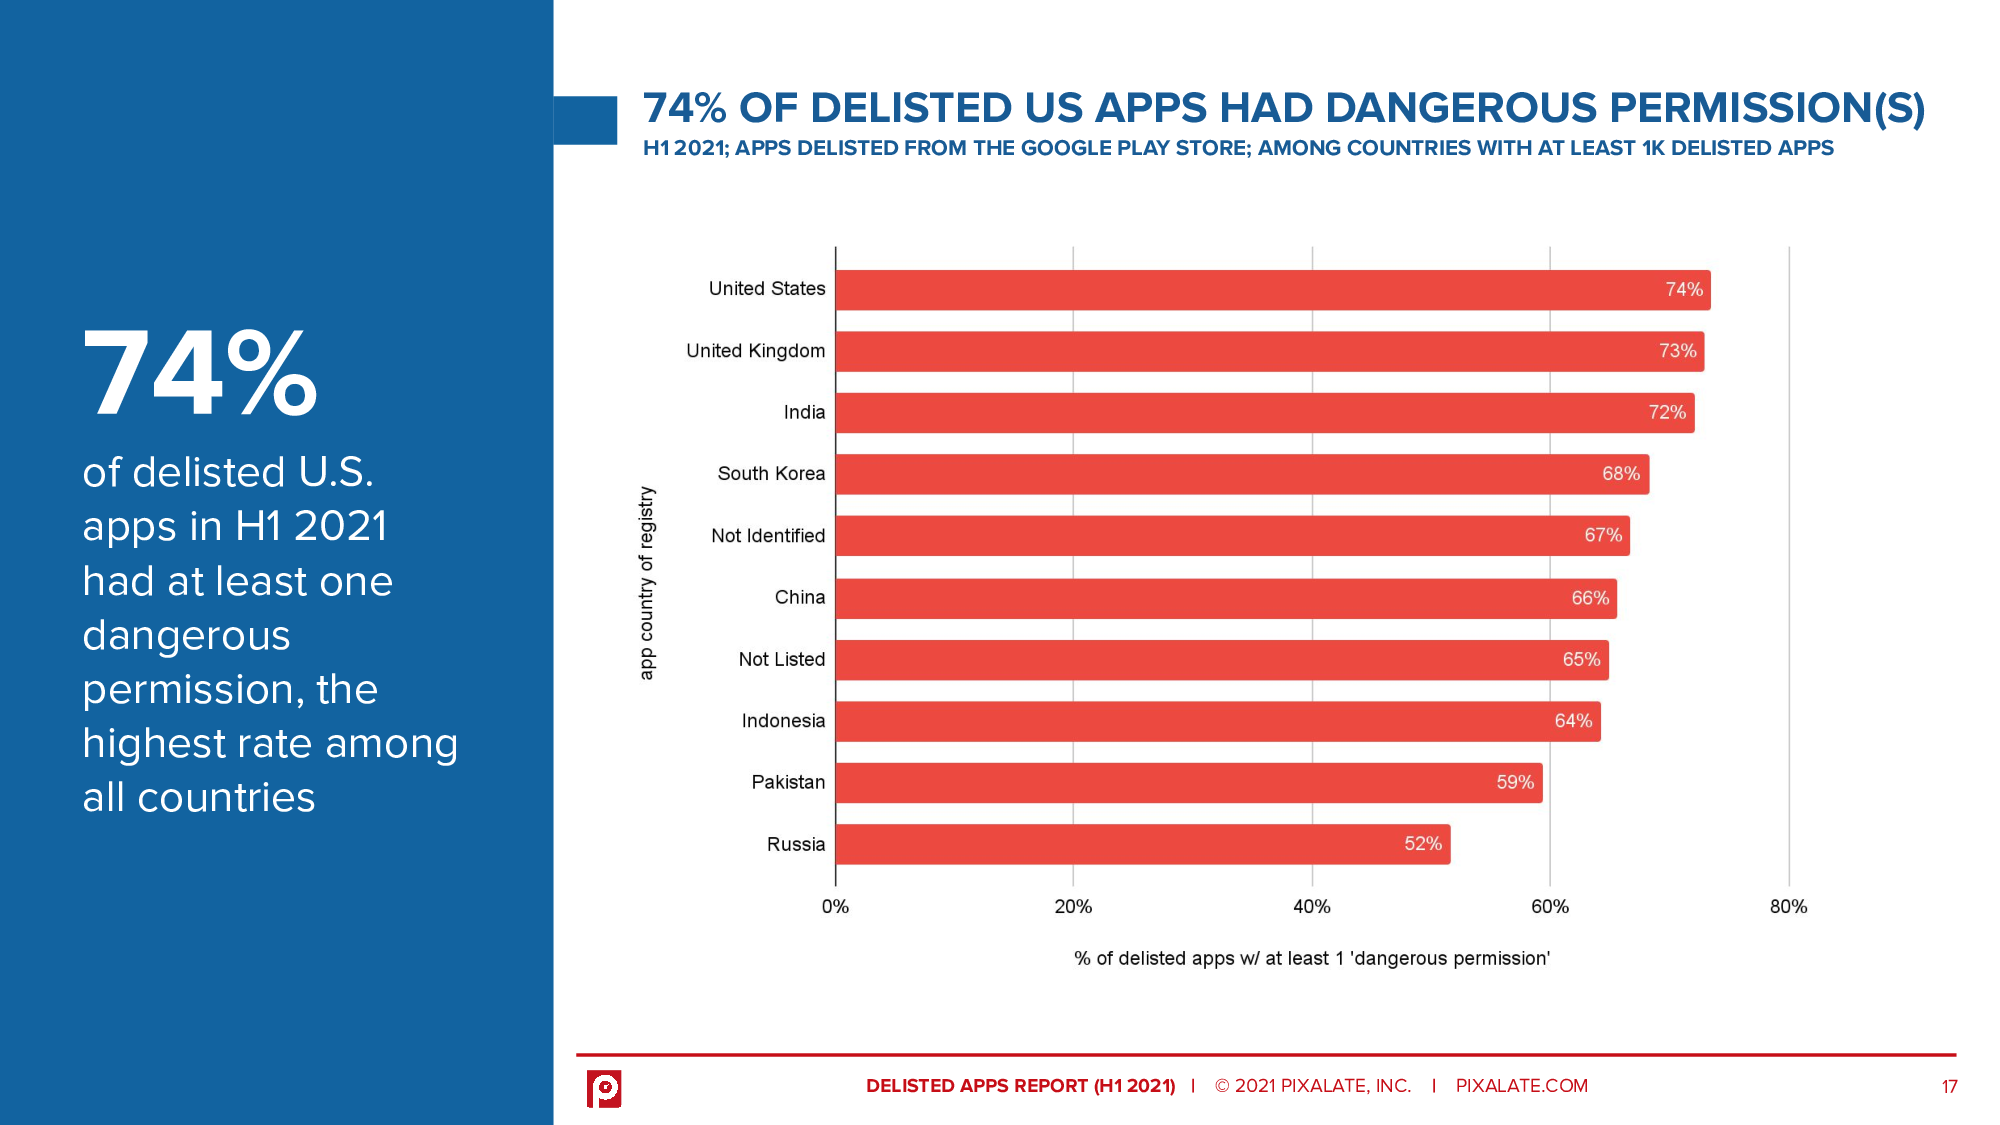 74% of delisted U.S. apps in H1 2021 had at least one dangerous permission, the highest rate among all countries